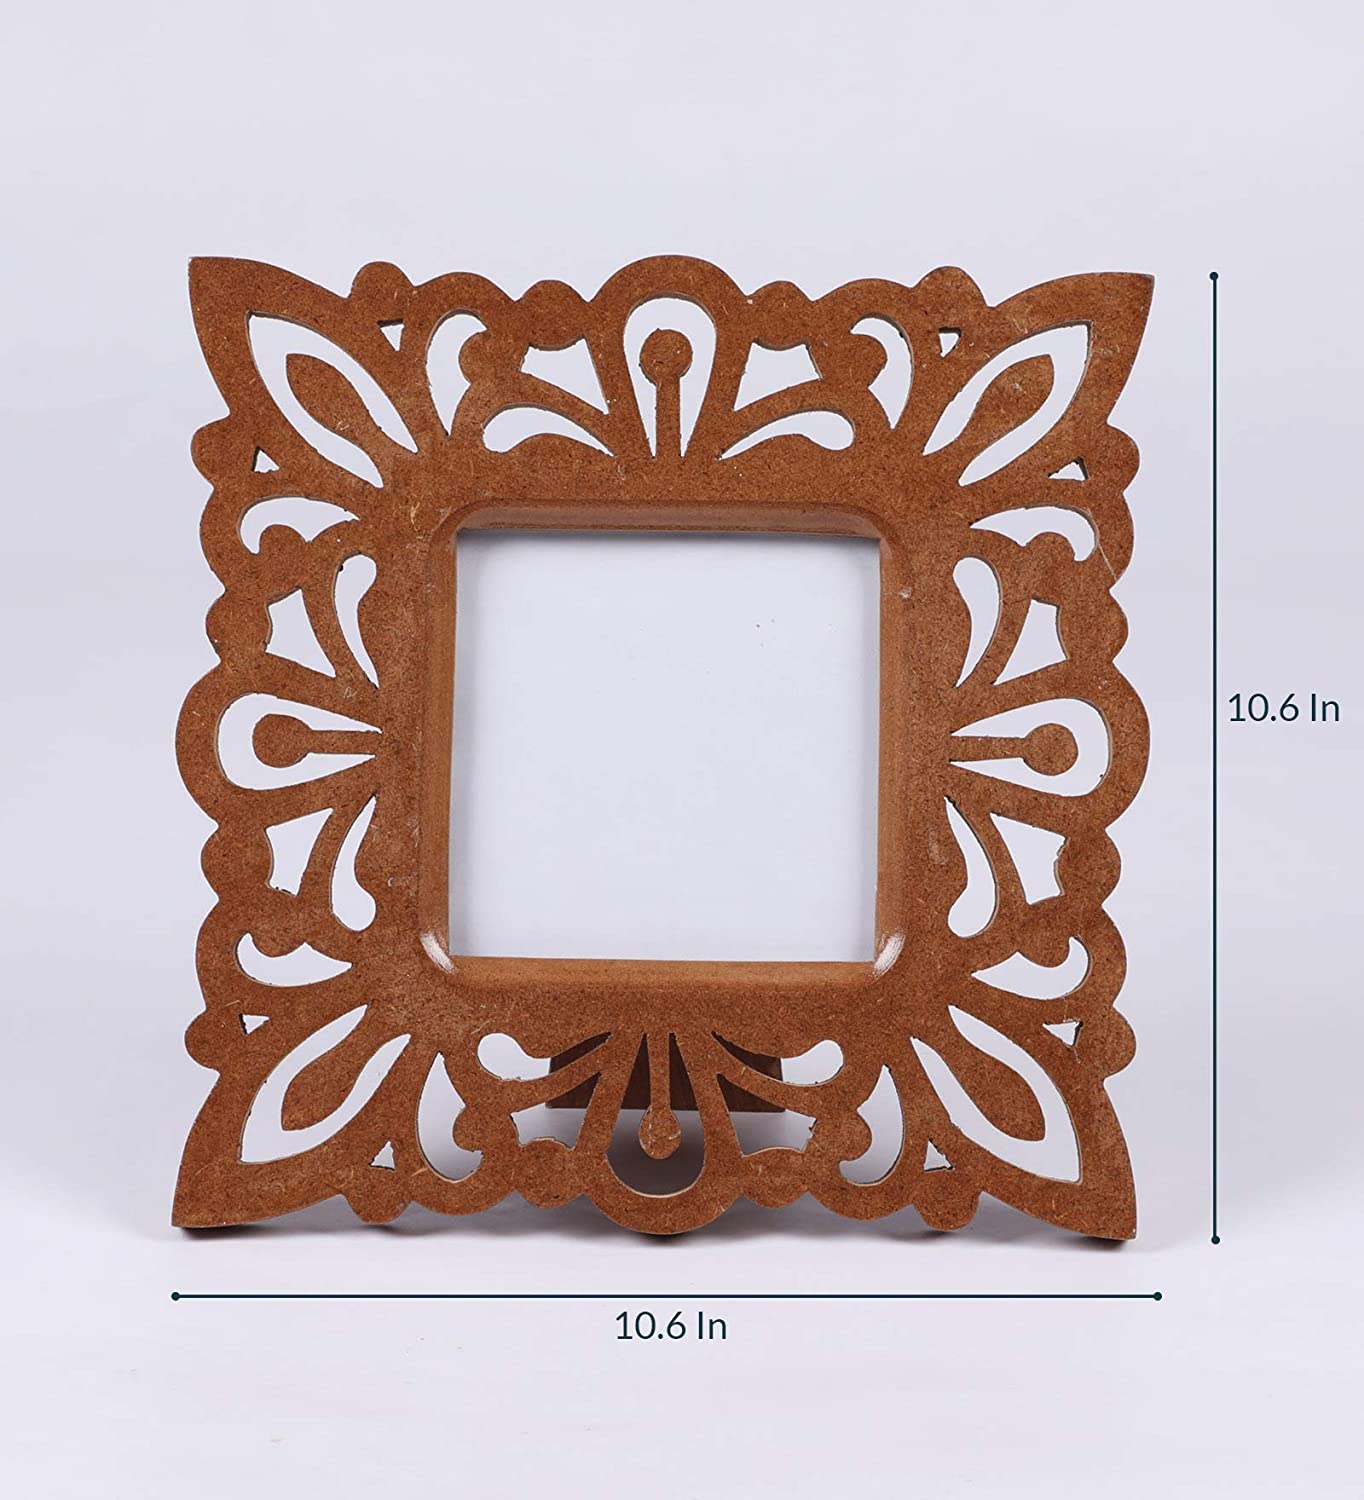 Decorative Hand Crafted Wooden Photo Frame (27 X 27 X 1.5 cm), (Model: TUS-PF-18), Brown Visit the The Urban Store Store